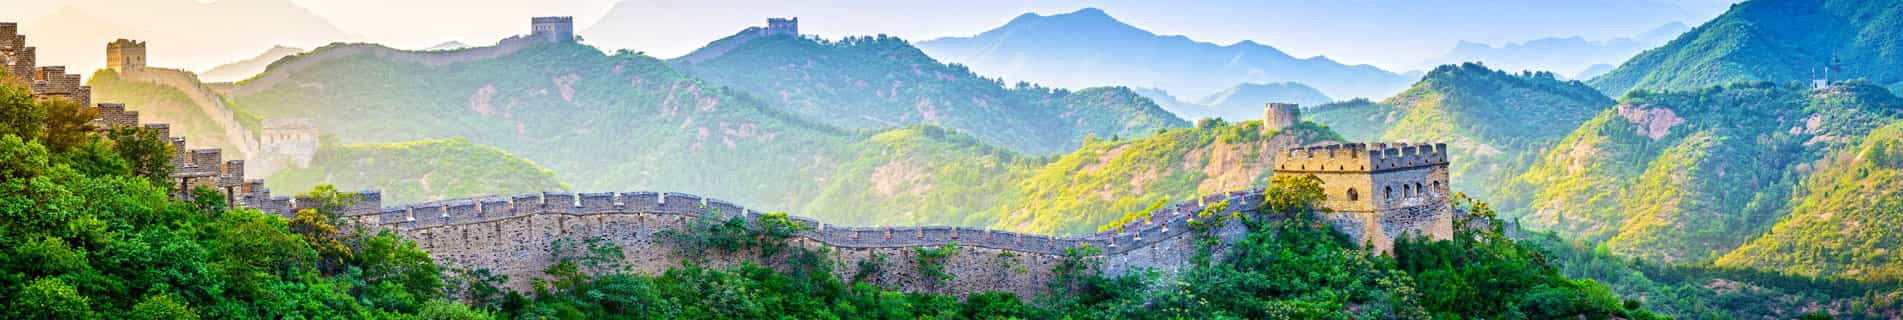 great wall of china tour video